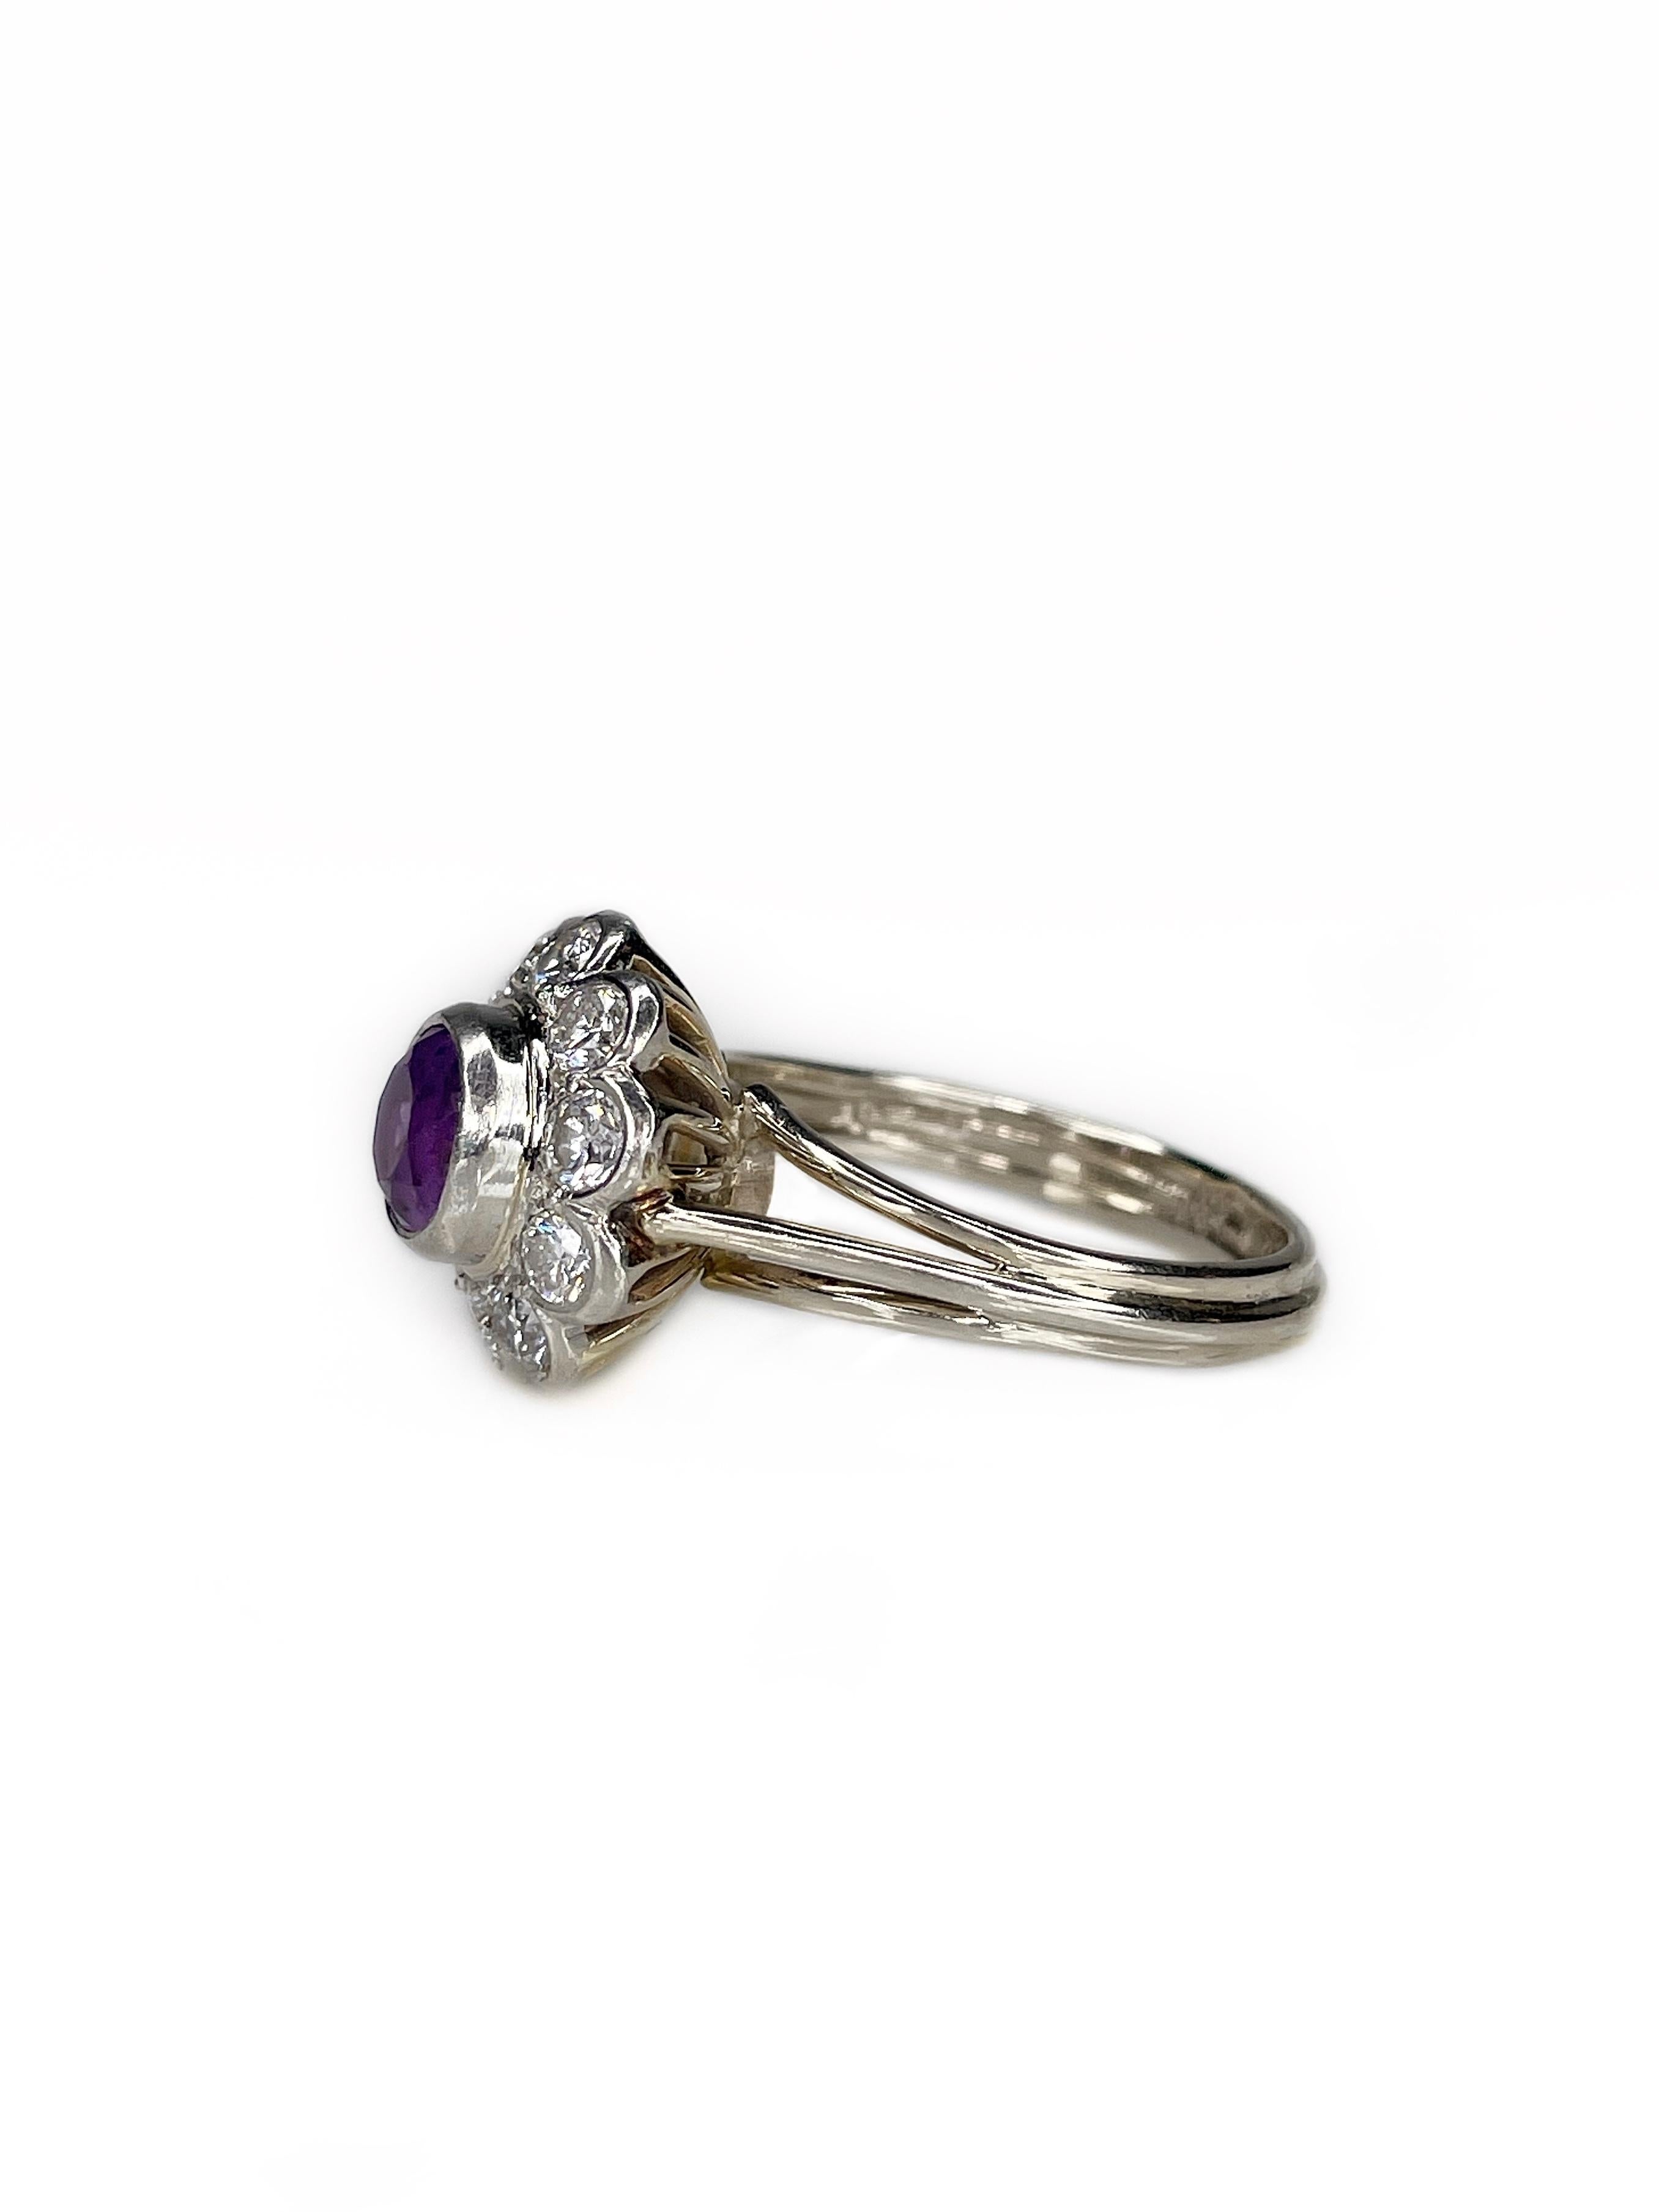 This is a classic design cluster ring crafted in 18K gold. Central stone is 0.70ct round single cut amethyst (diameter 0.6cm, P6/3, SI). It is surrounded by 10 round brilliant cut diamonds, which weight in total 0.70ct, colour is RW/W, clarity